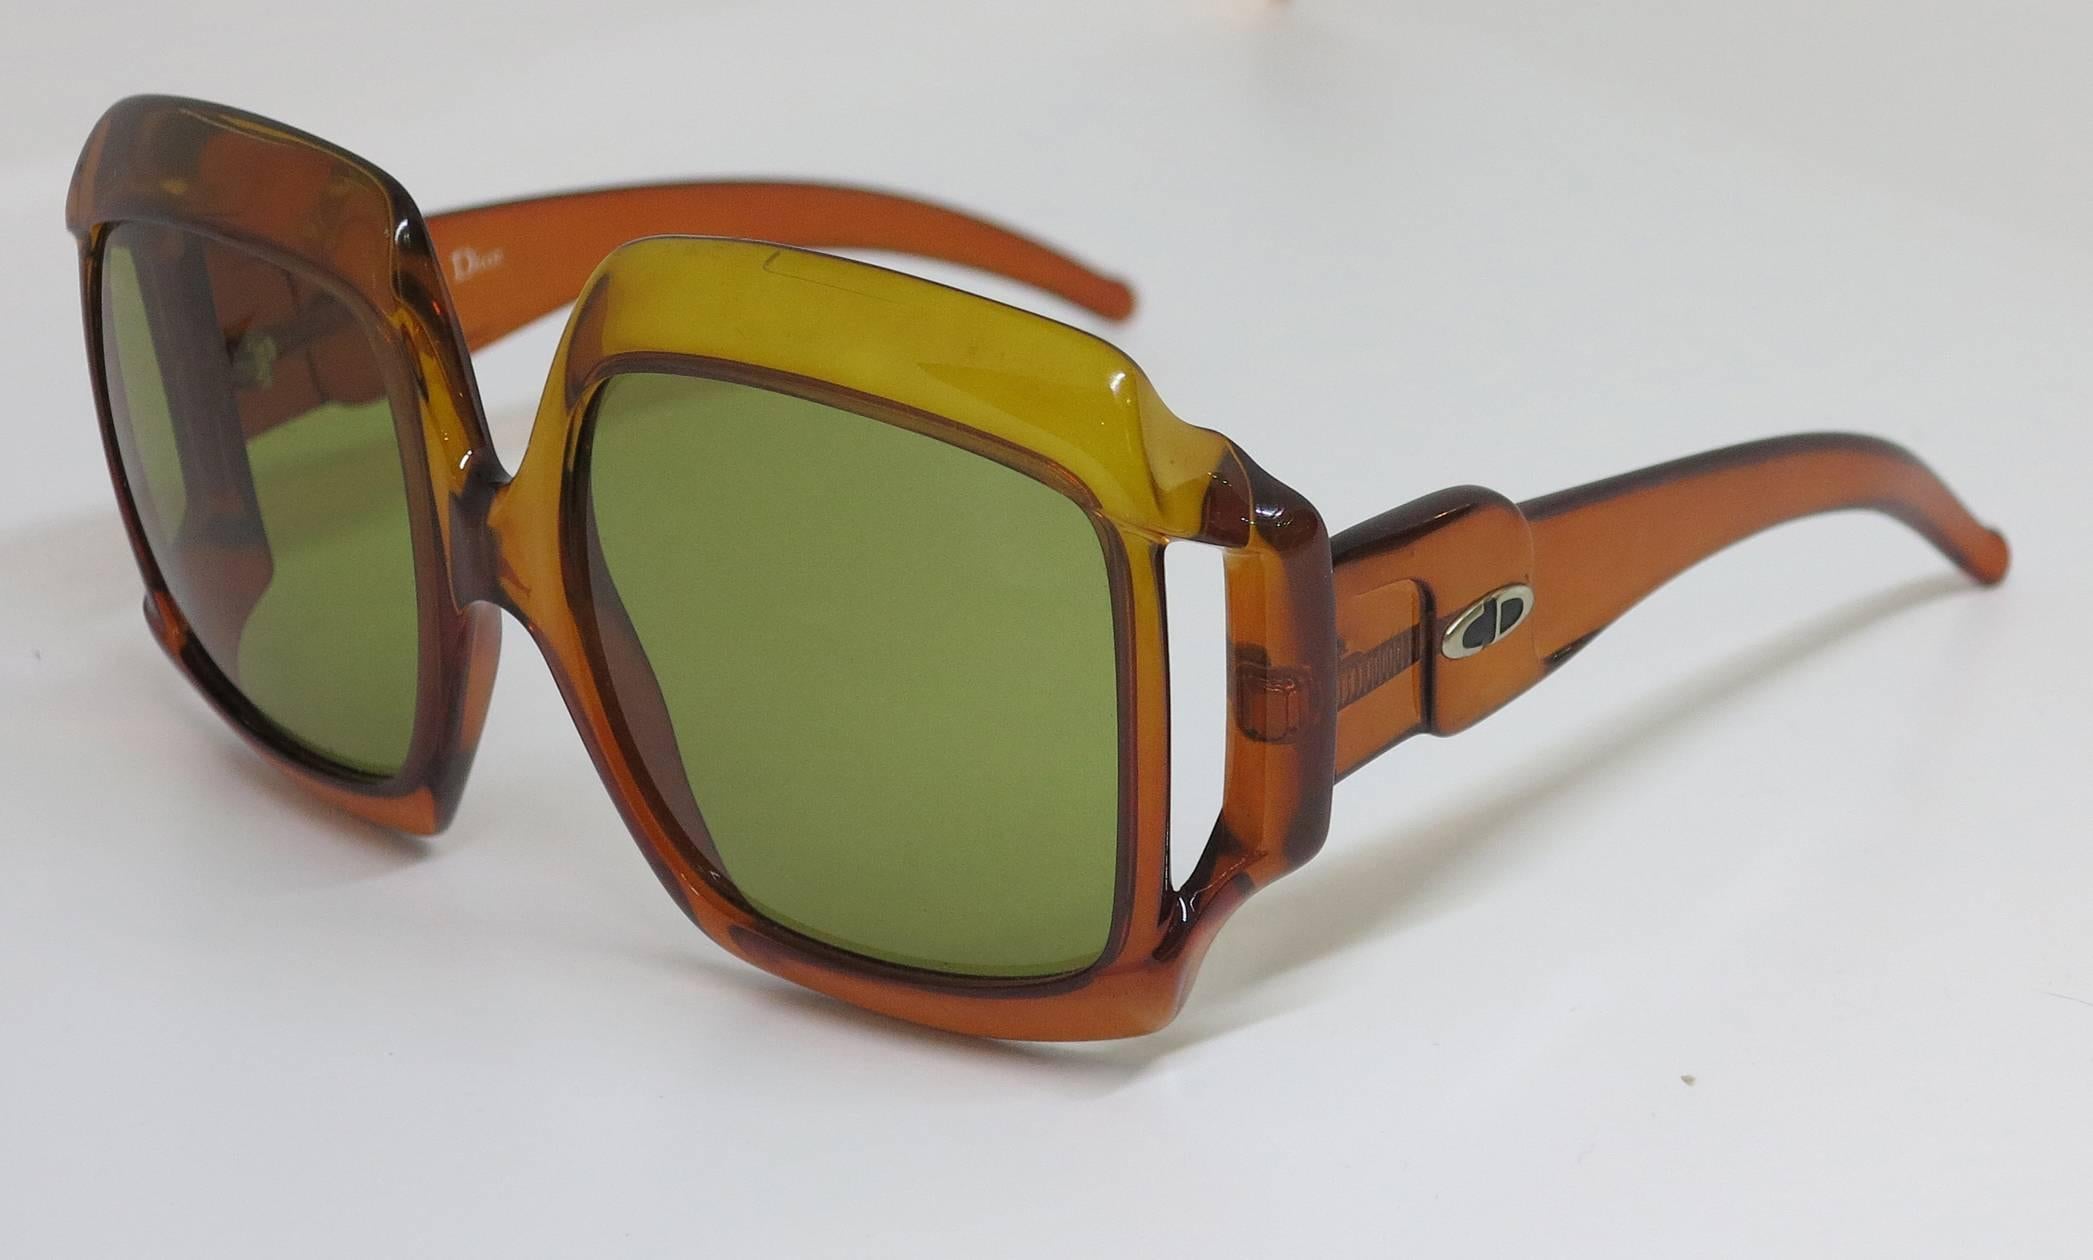 Christian Dior dark amber big square sunglasses from the 1970s...Approximately 6 1/8" wide x 3" high 5 3/4" side piece front to back...In excellent condition, lenses with extremely light wear, lenses are amber/brown colour.